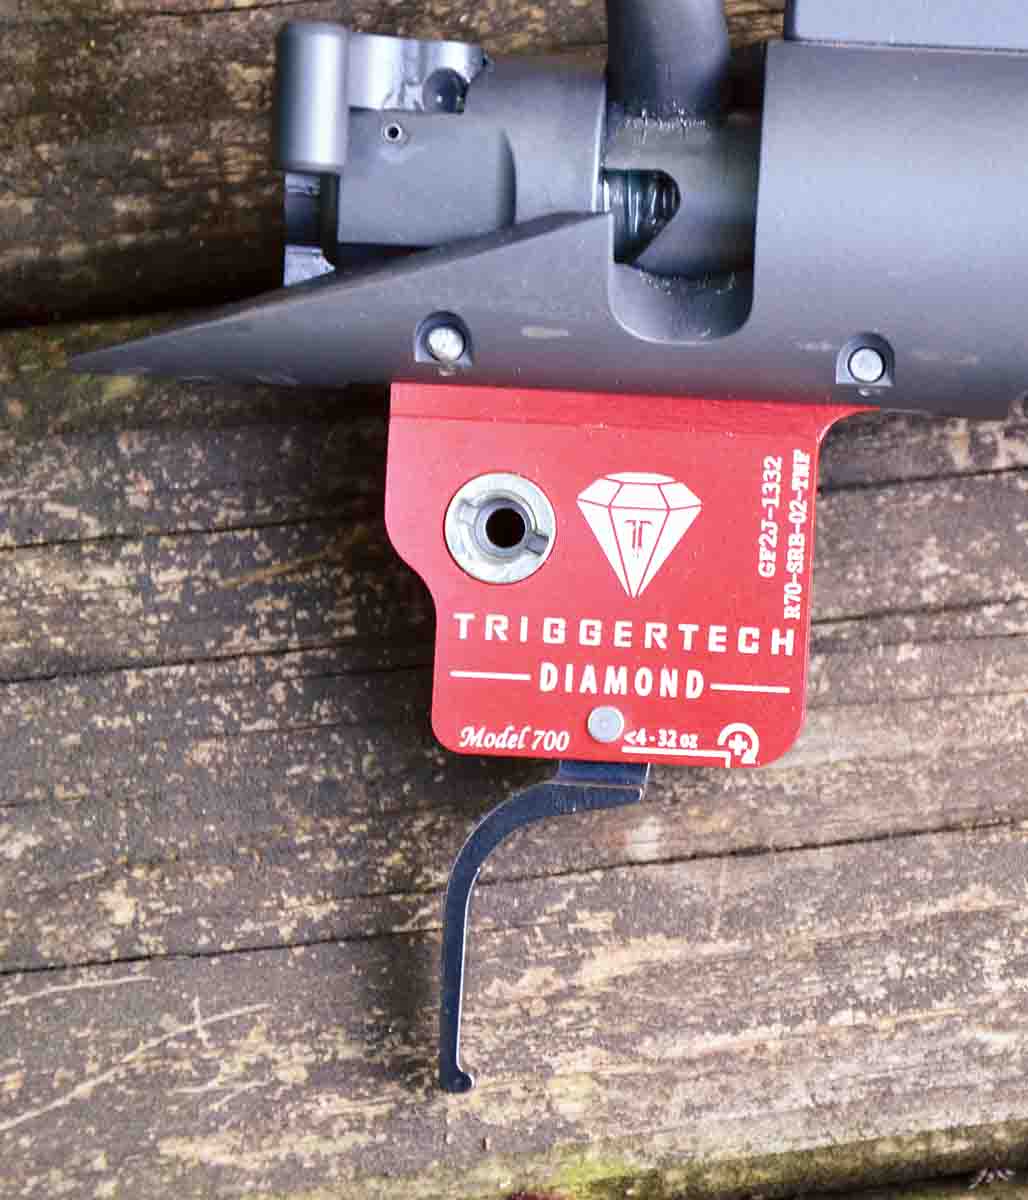 The pull weight adjustment range of the TriggerTech Diamond trigger is 4 to 32 ounces and the owner of the rifle had adjusted it to 12 ounces. It is an excellent choice for a rifle used in competition, but the H-S Precision trigger is a better choice for a hunting rifle.